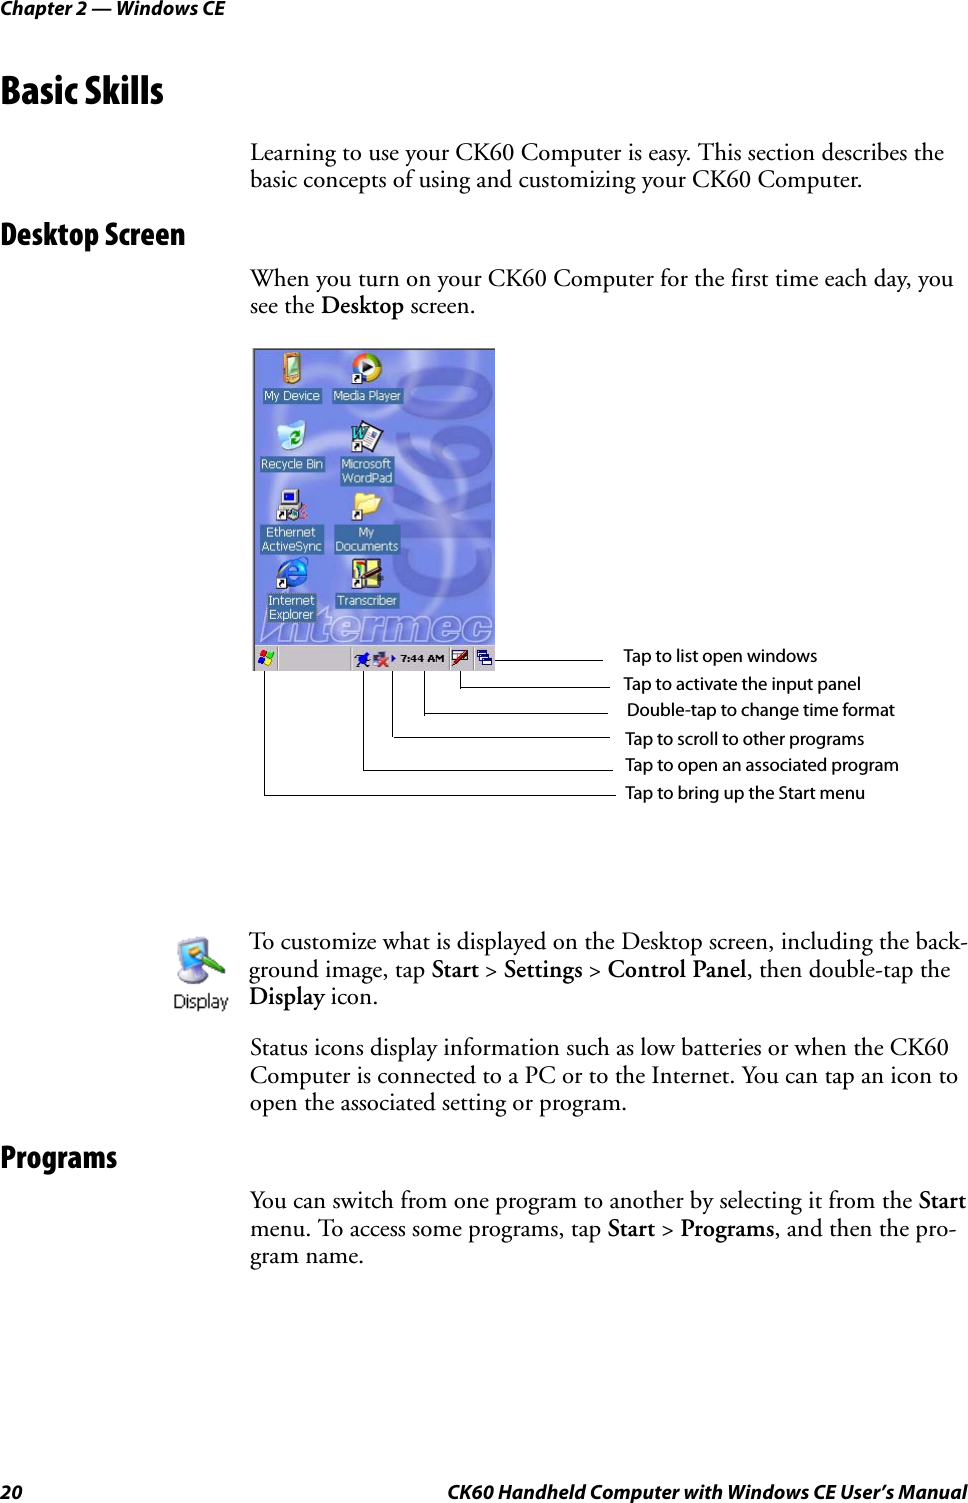 Chapter 2 — Windows CE20 CK60 Handheld Computer with Windows CE User’s ManualBasic SkillsLearning to use your CK60 Computer is easy. This section describes the basic concepts of using and customizing your CK60 Computer.Desktop ScreenWhen you turn on your CK60 Computer for the first time each day, you see the Desktop screen.Status icons display information such as low batteries or when the CK60 Computer is connected to a PC or to the Internet. You can tap an icon to open the associated setting or program.ProgramsYou can switch from one program to another by selecting it from the Start menu. To access some programs, tap Start &gt; Programs, and then the pro-gram name.To customize what is displayed on the Desktop screen, including the back-ground image, tap Start &gt; Settings &gt; Control Panel, then double-tap the Display icon.Tap to list open windowsTap to activate the input panelDouble-tap to change time formatTap to scroll to other programsTap to open an associated programTap to bring up the Start menu